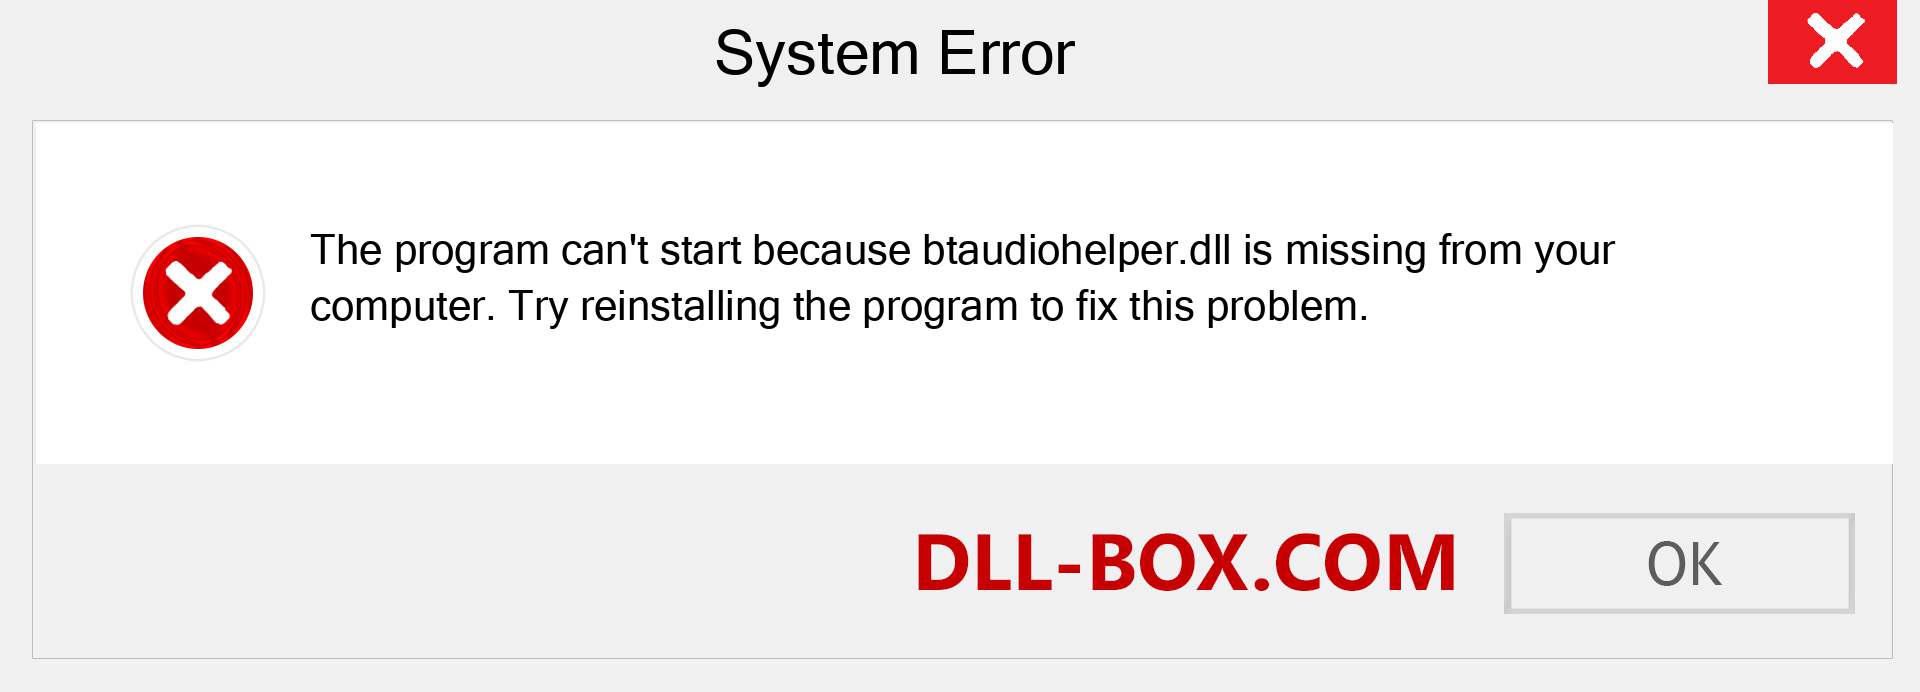  btaudiohelper.dll file is missing?. Download for Windows 7, 8, 10 - Fix  btaudiohelper dll Missing Error on Windows, photos, images